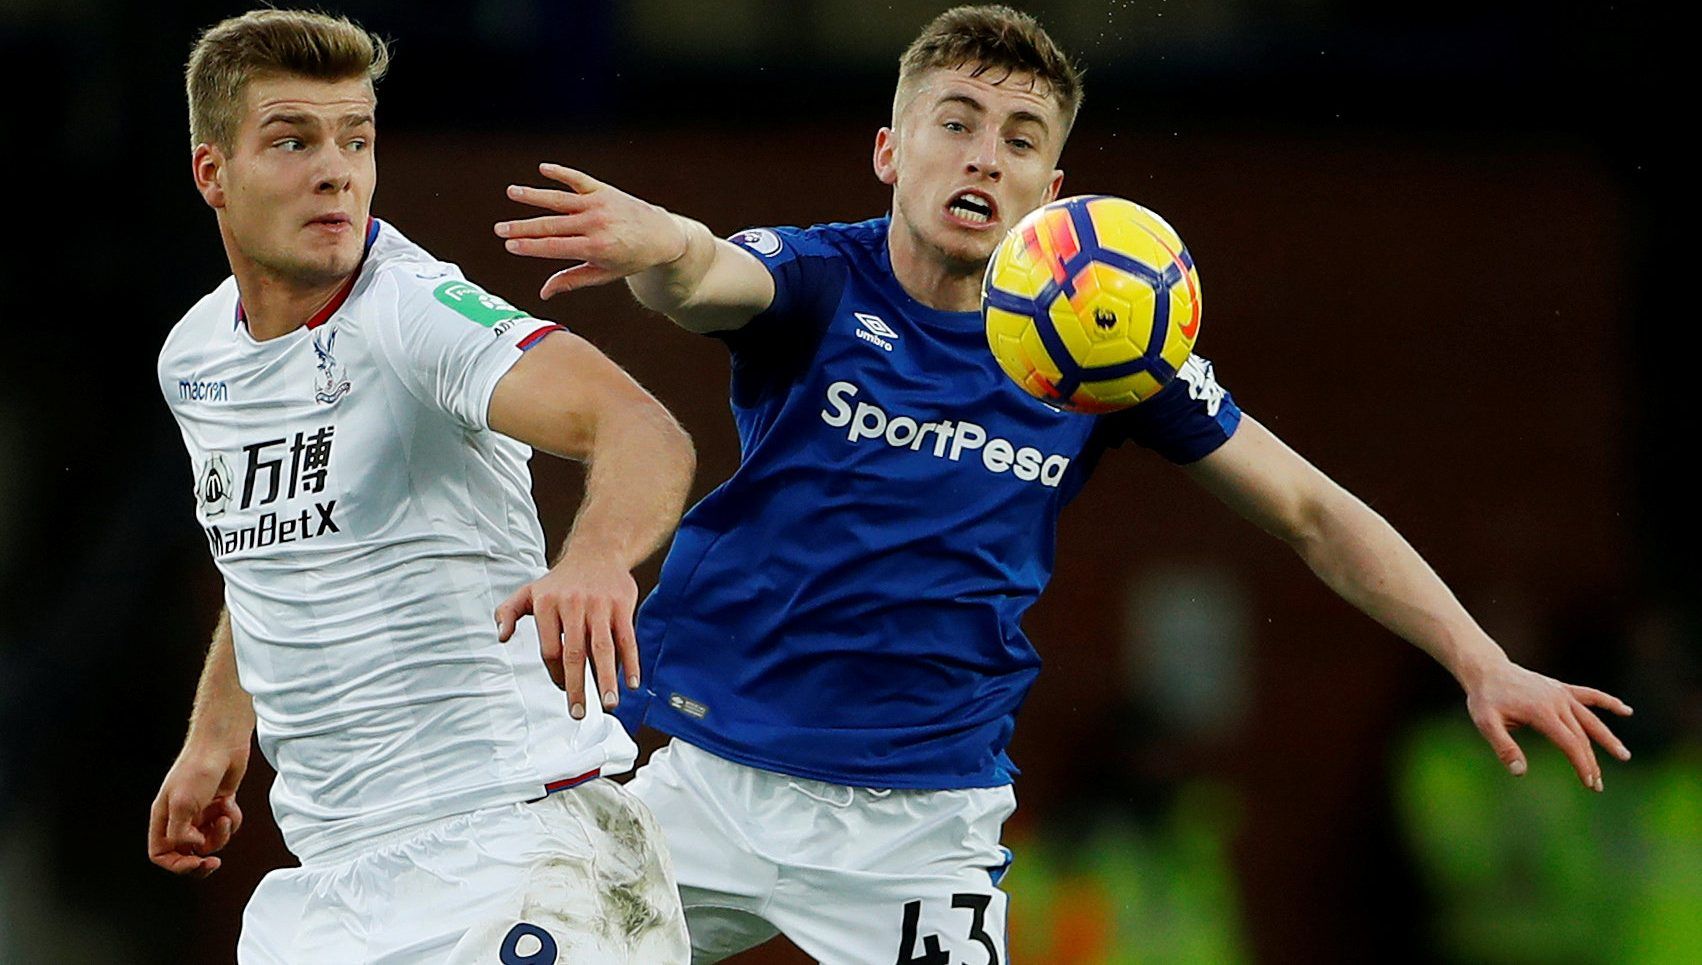 Soccer Football - Premier League - Everton vs Crystal Palace - Goodison Park, Liverpool, Britain - February 10, 2018   Crystal Palace's Alexander Sorloth in action with Everton's Jonjoe Kenny   Action Images via Reuters/Lee Smith    EDITORIAL USE ONLY. No use with unauthorized audio, video, data, fixture lists, club/league logos or 